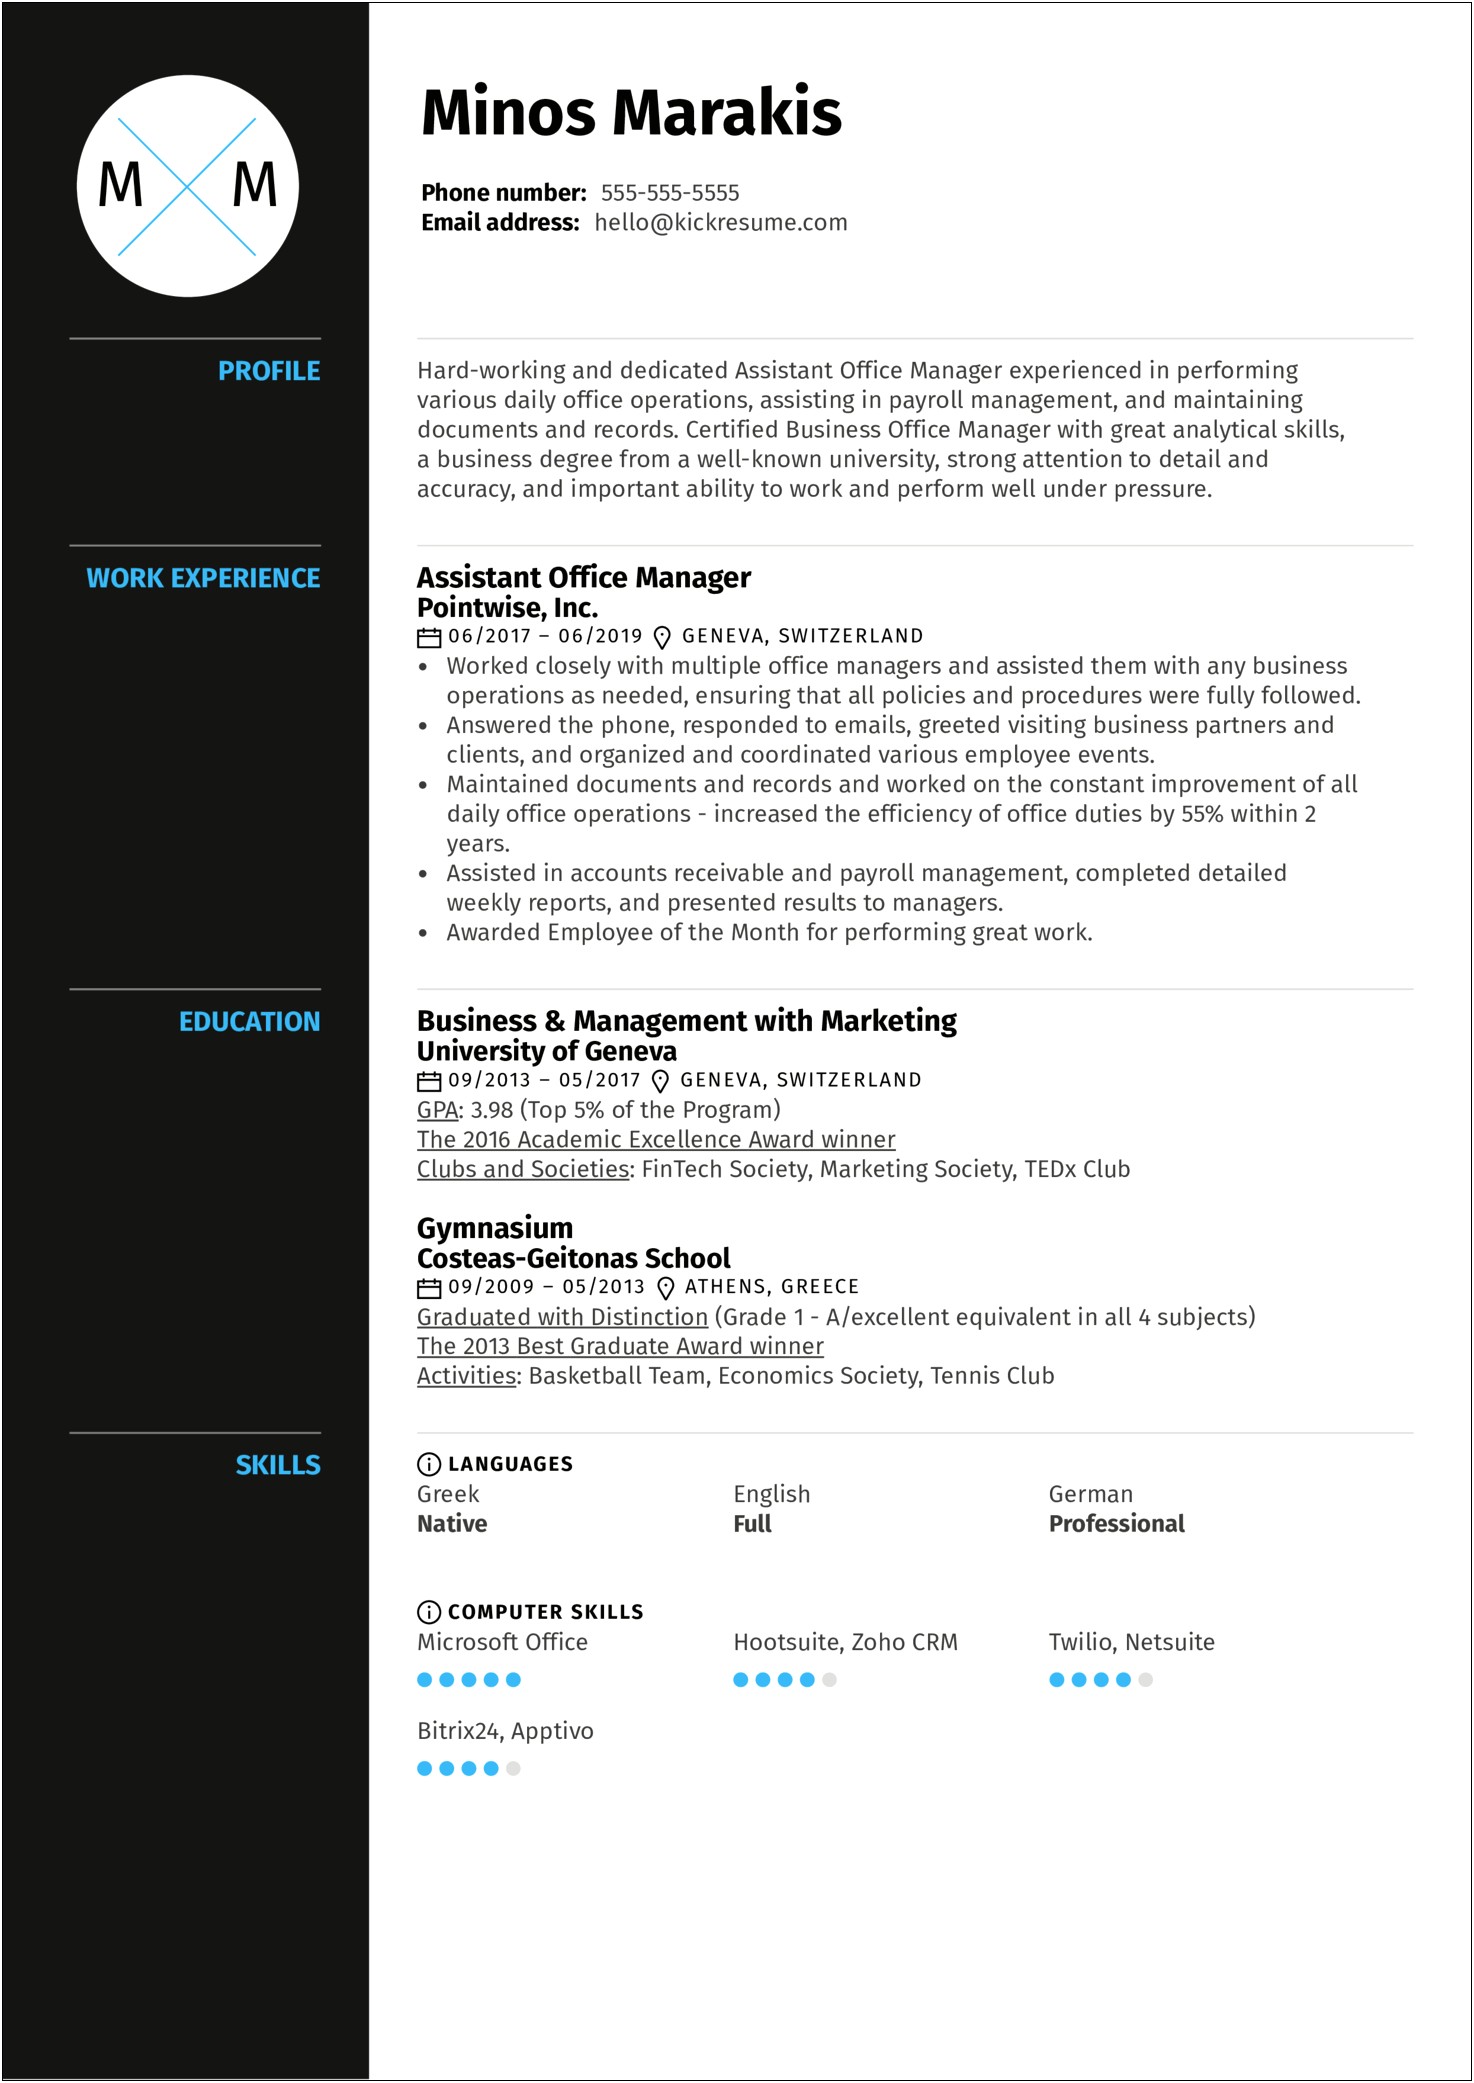 Aministration Operations School Manager Resume